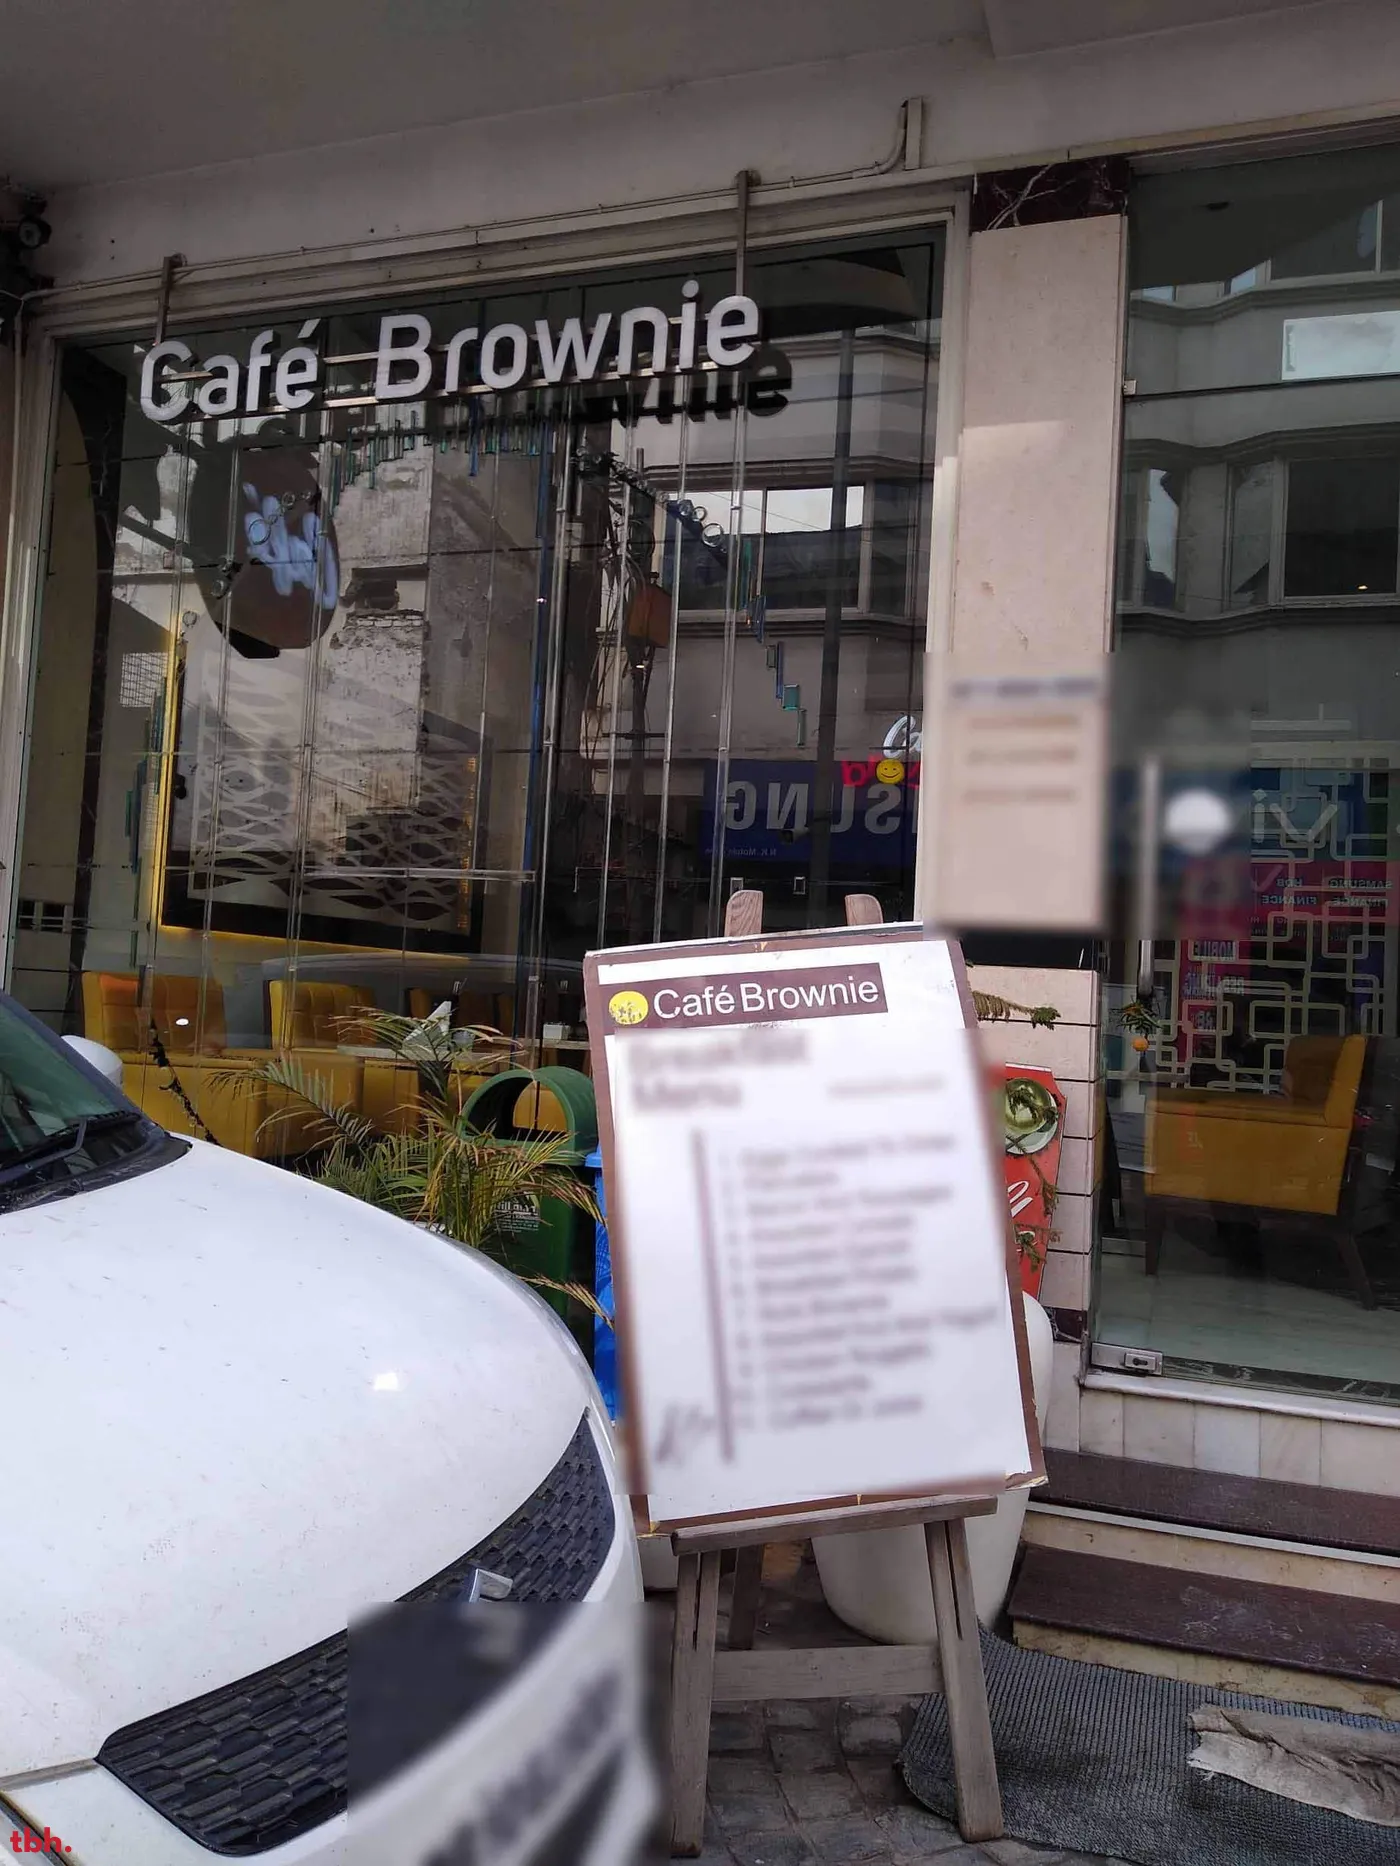 Cafe Brownie outlet image